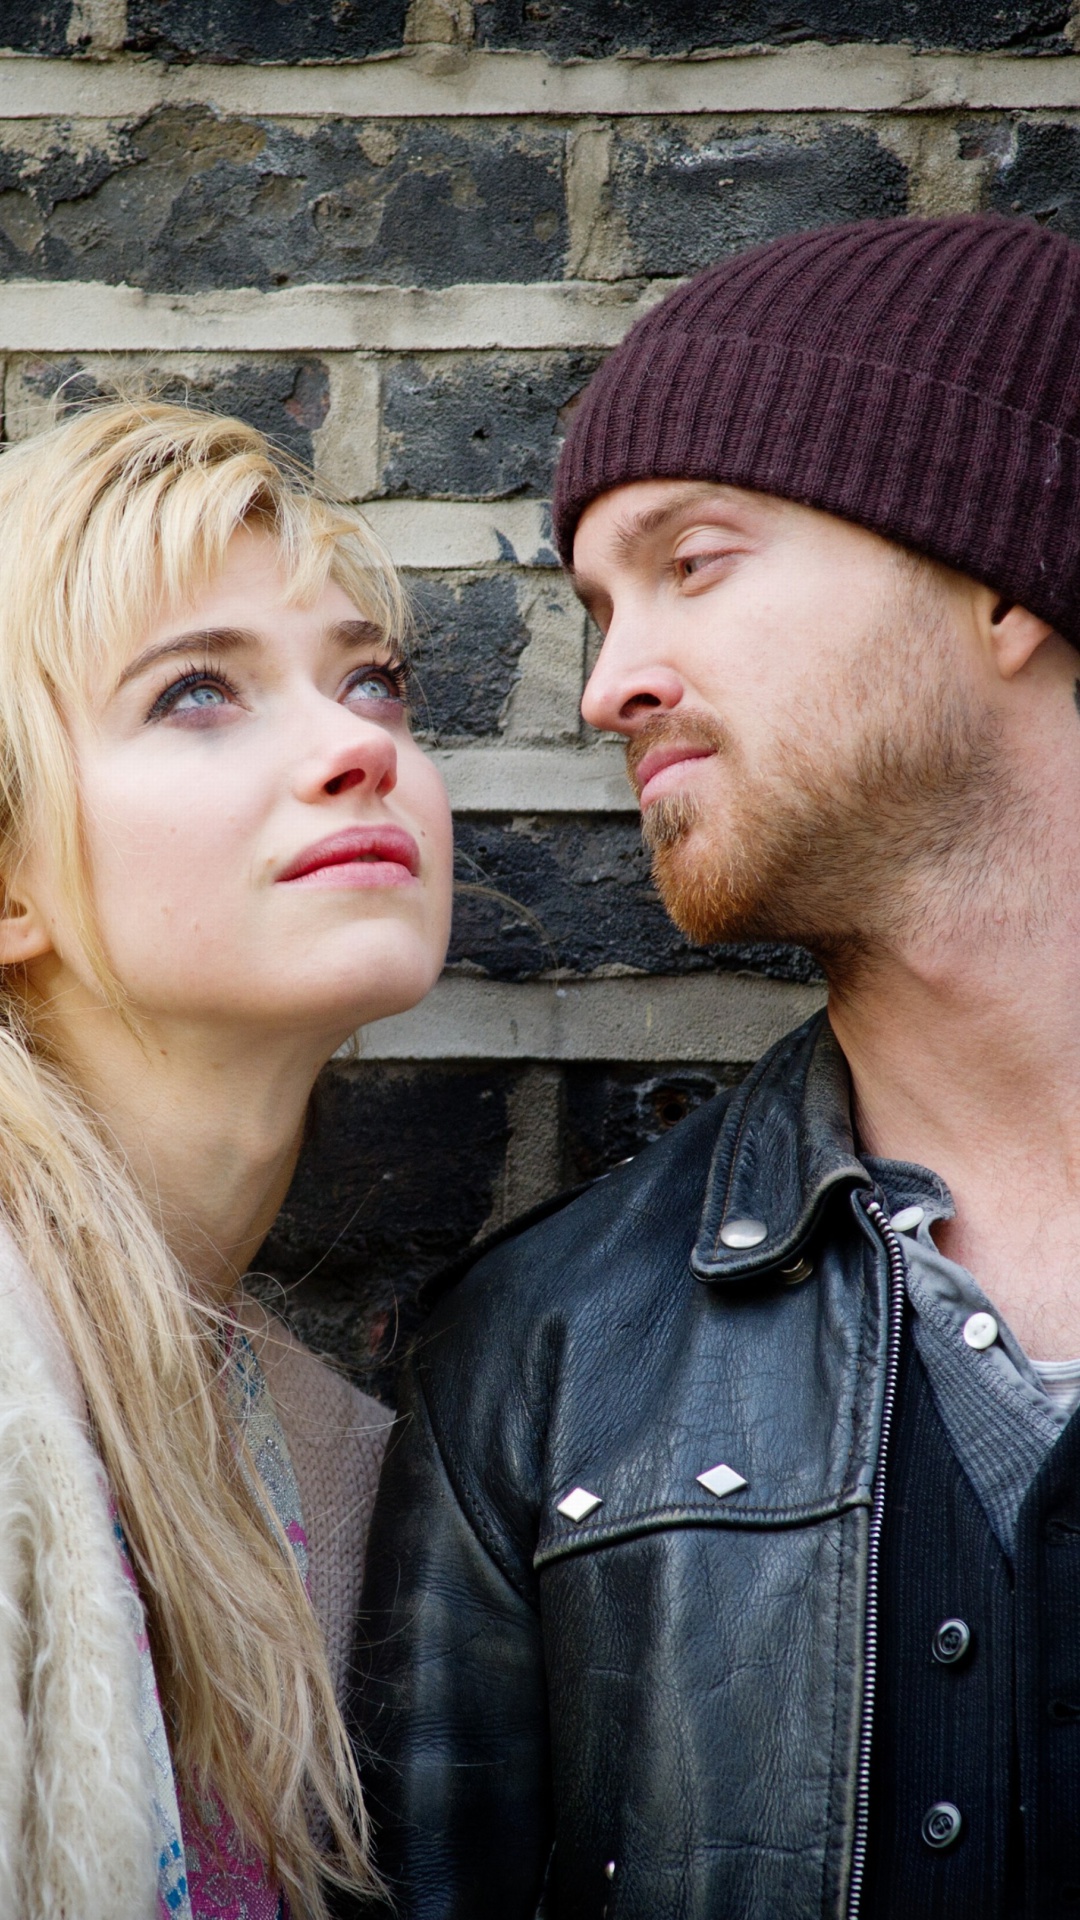 A Long Way Down with Aaron Paul and Imogen Poots Wallpaper for iPhone 6 Plus